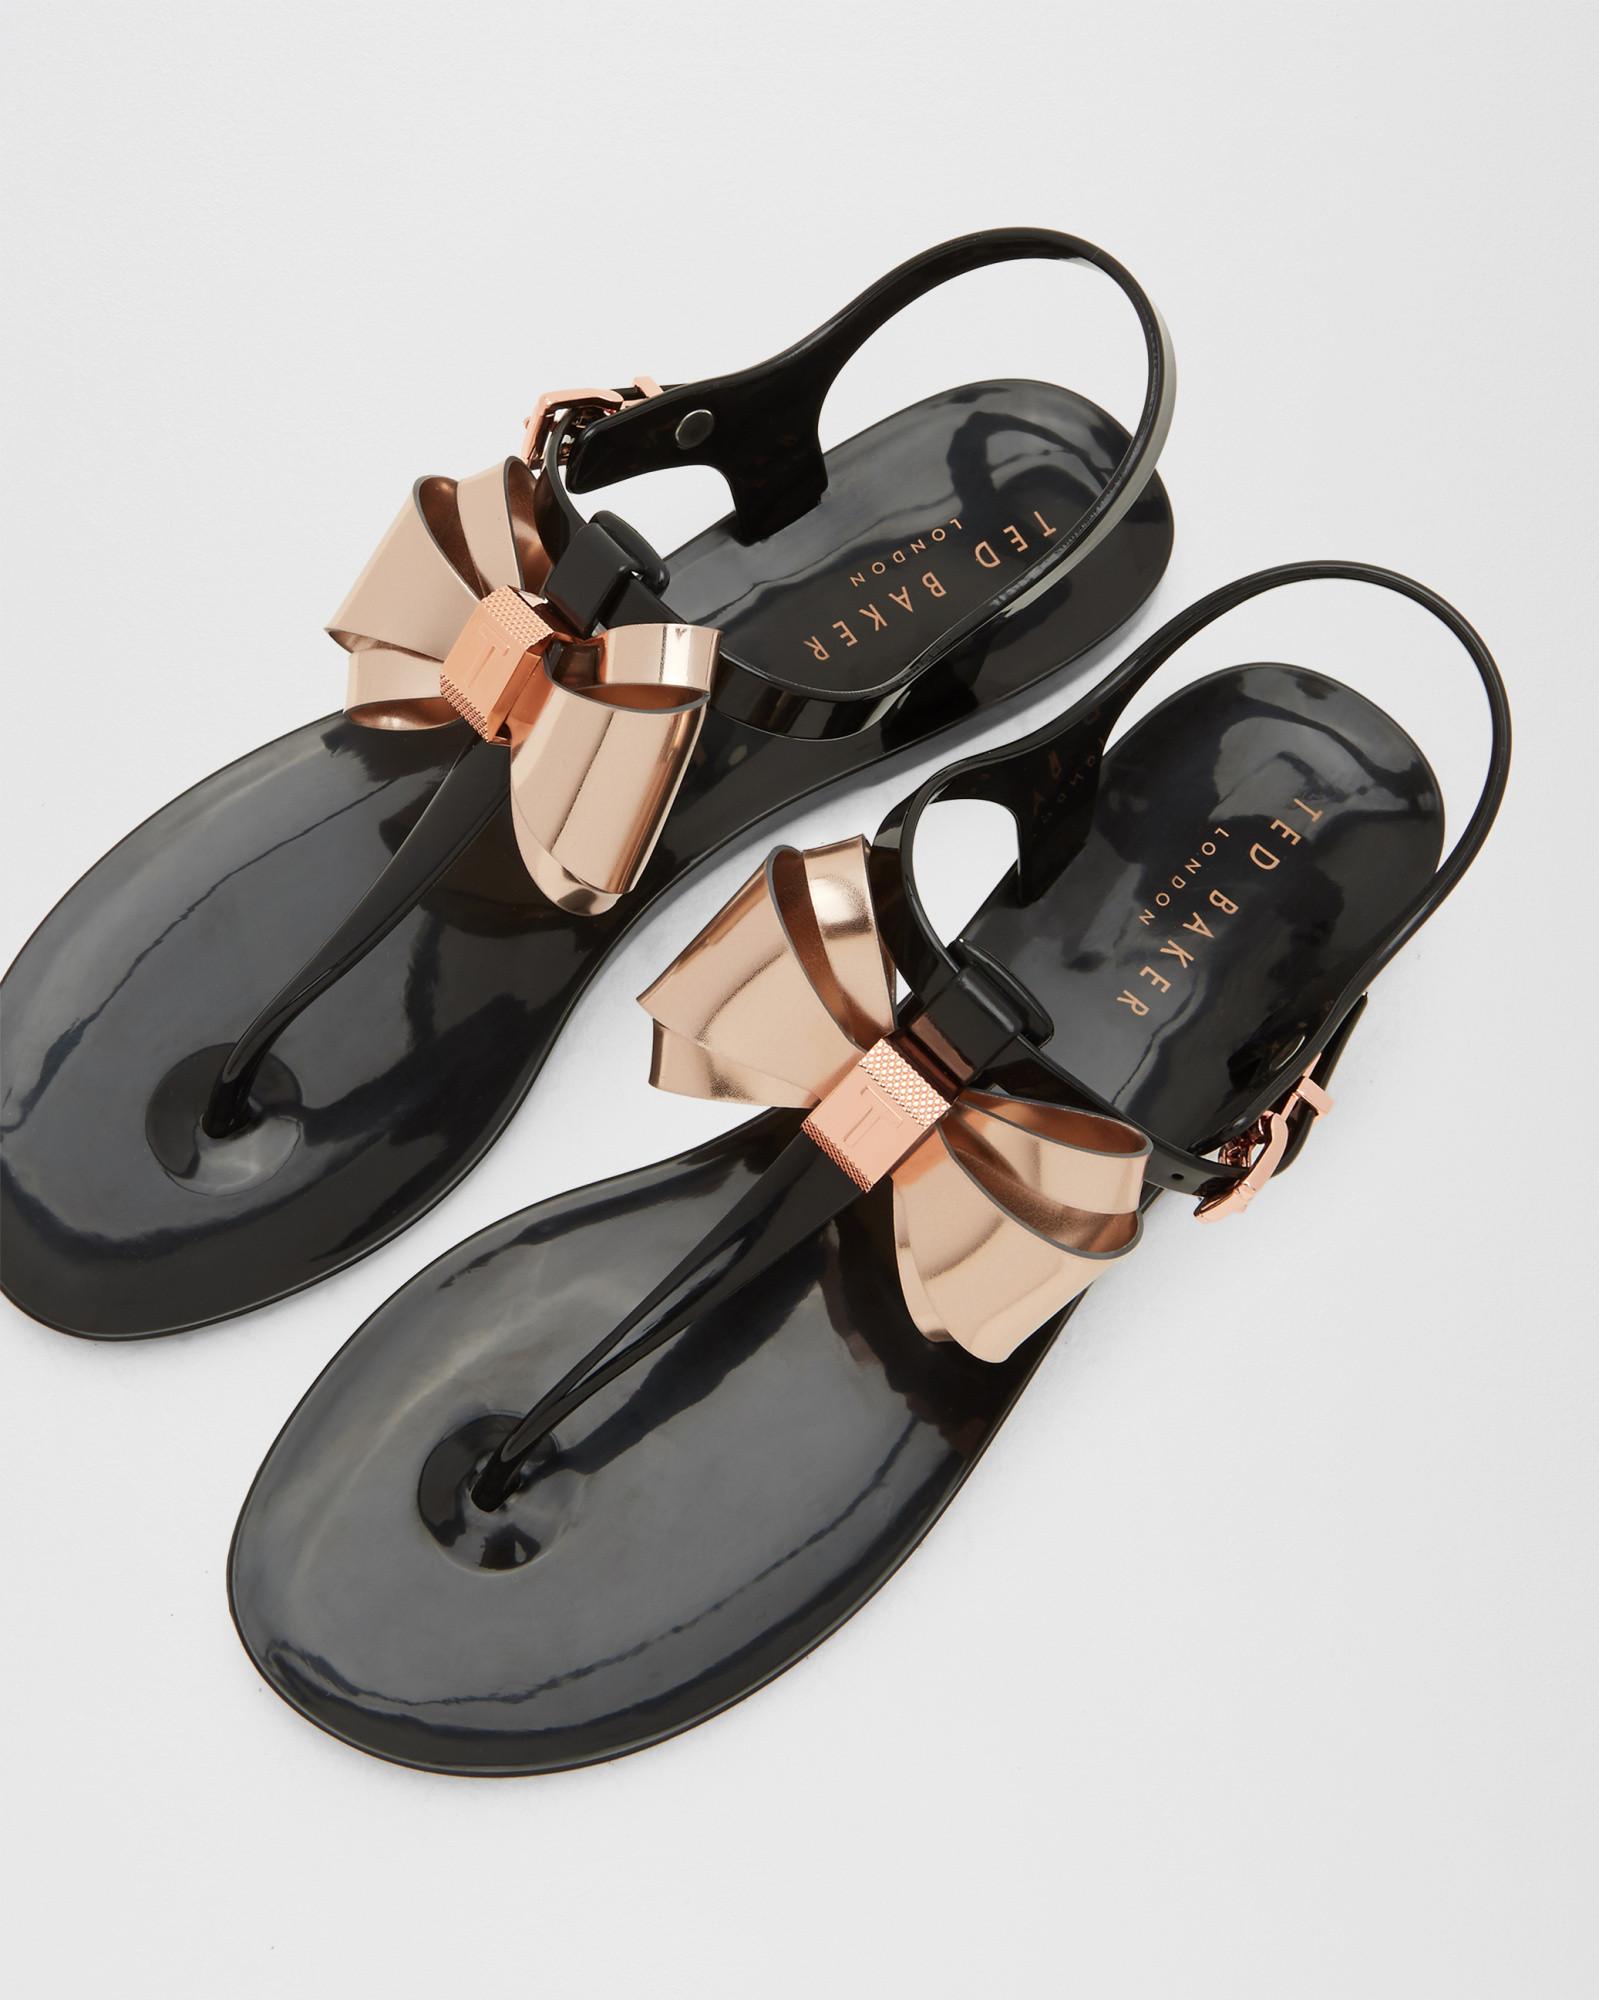 Lyst - Ted Baker Metallic Bow Jelly Sandals in Black